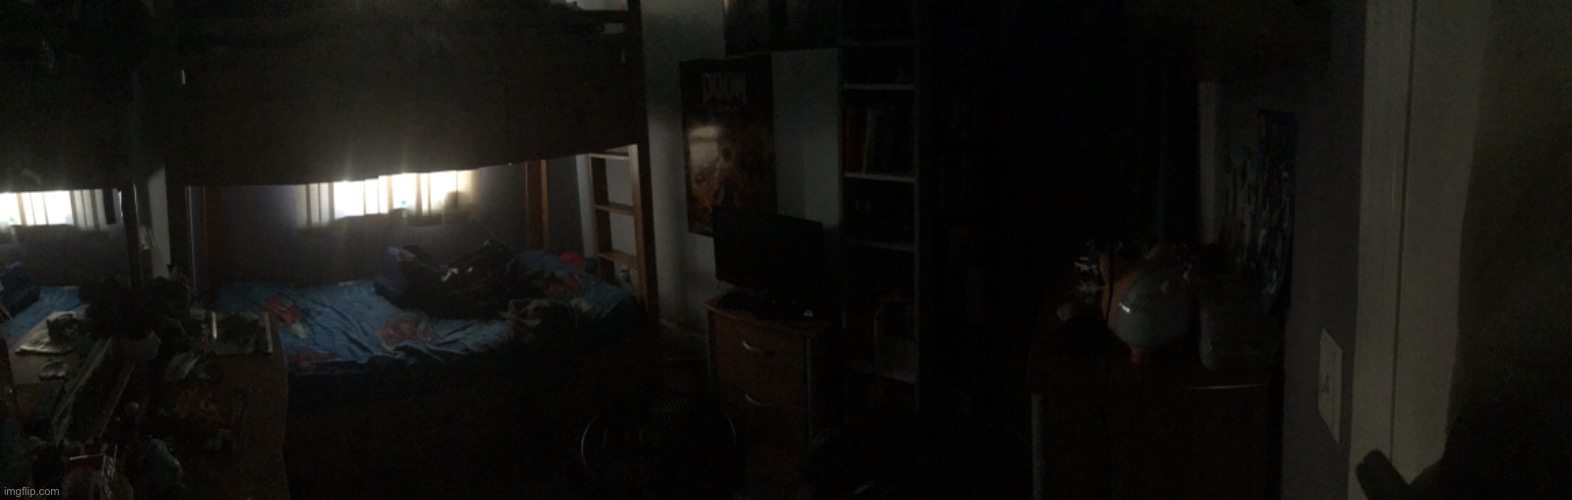 My cursed room | image tagged in cursed image,coom cave | made w/ Imgflip meme maker